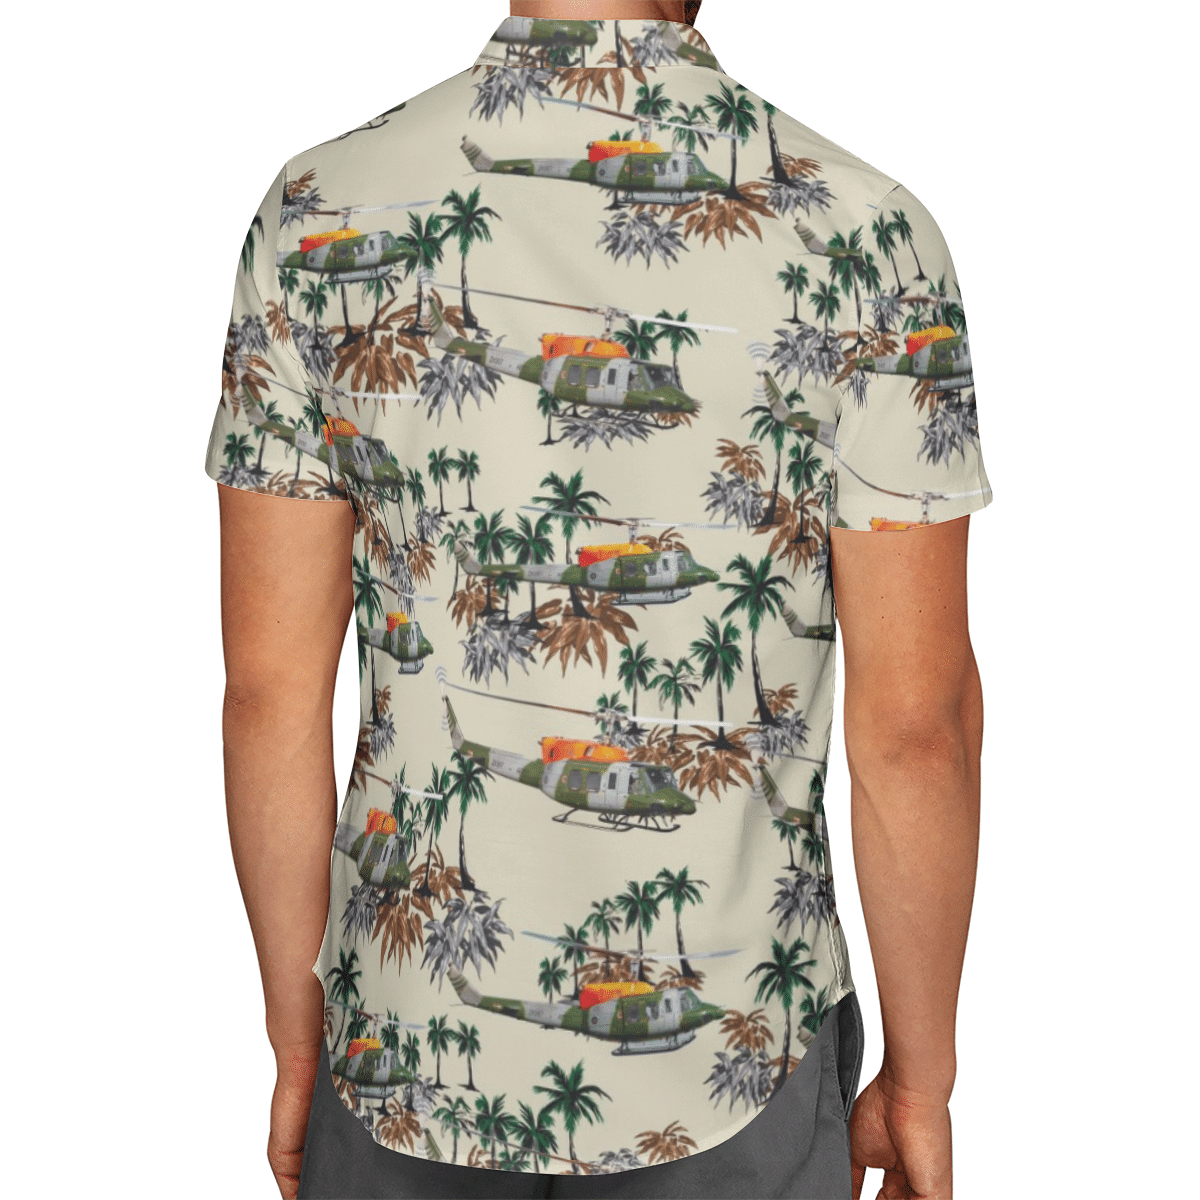 Going to the beach with a quality shirt 23